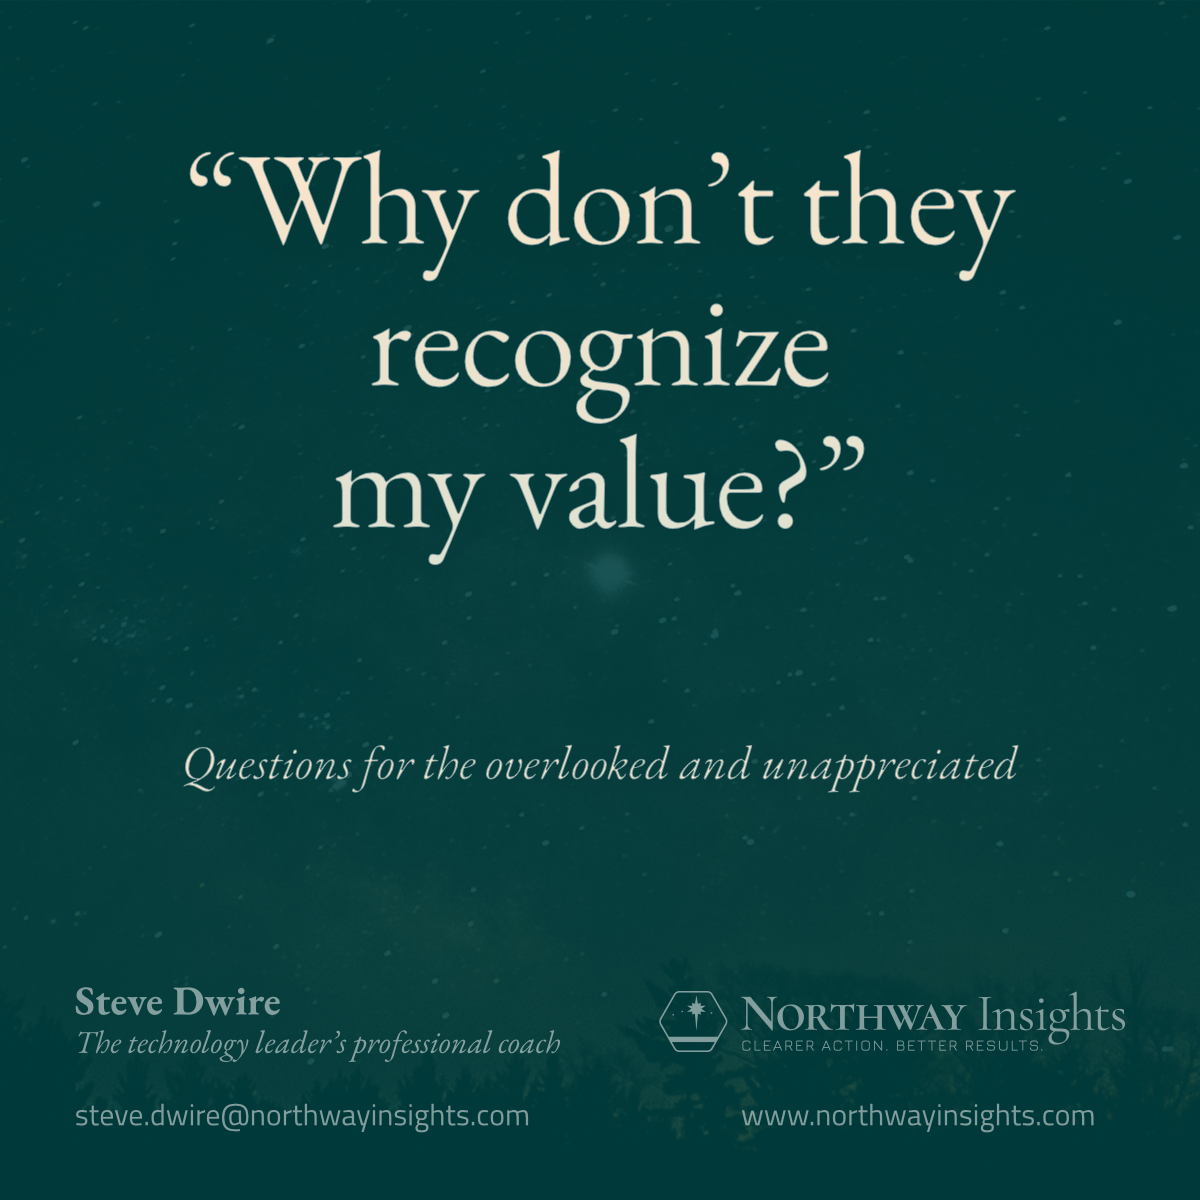 "Why don't they recognize my value?" (Questions for the overlooked and unappreciated)